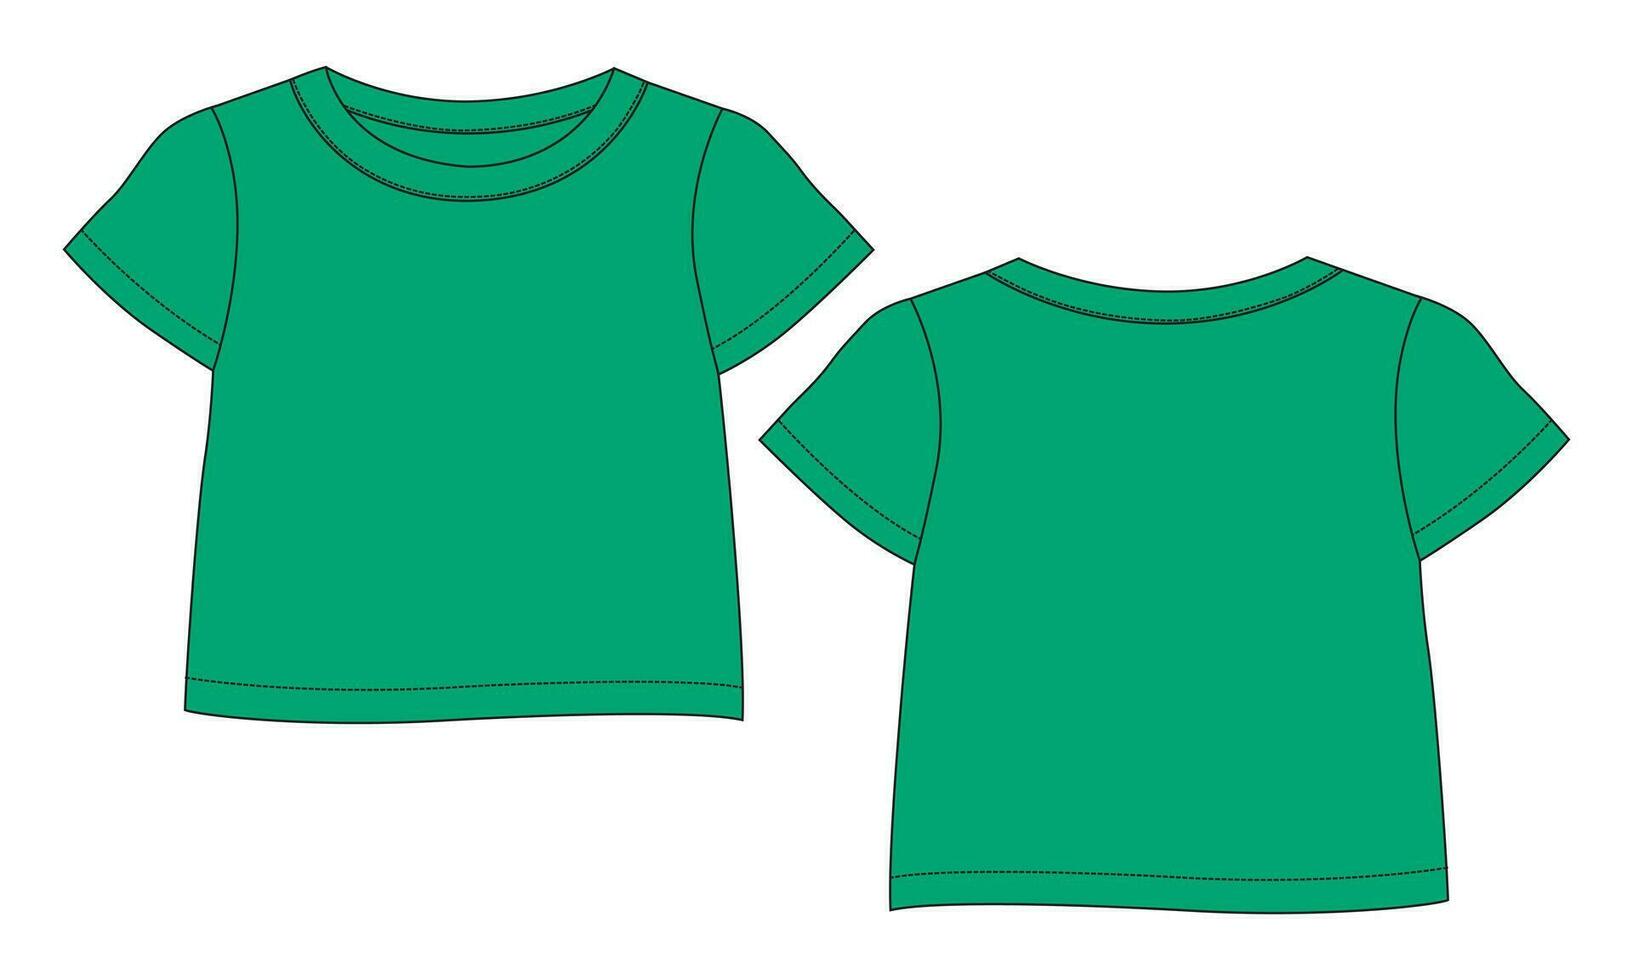 Baby girls T shirt tops vector illustration template front and back views